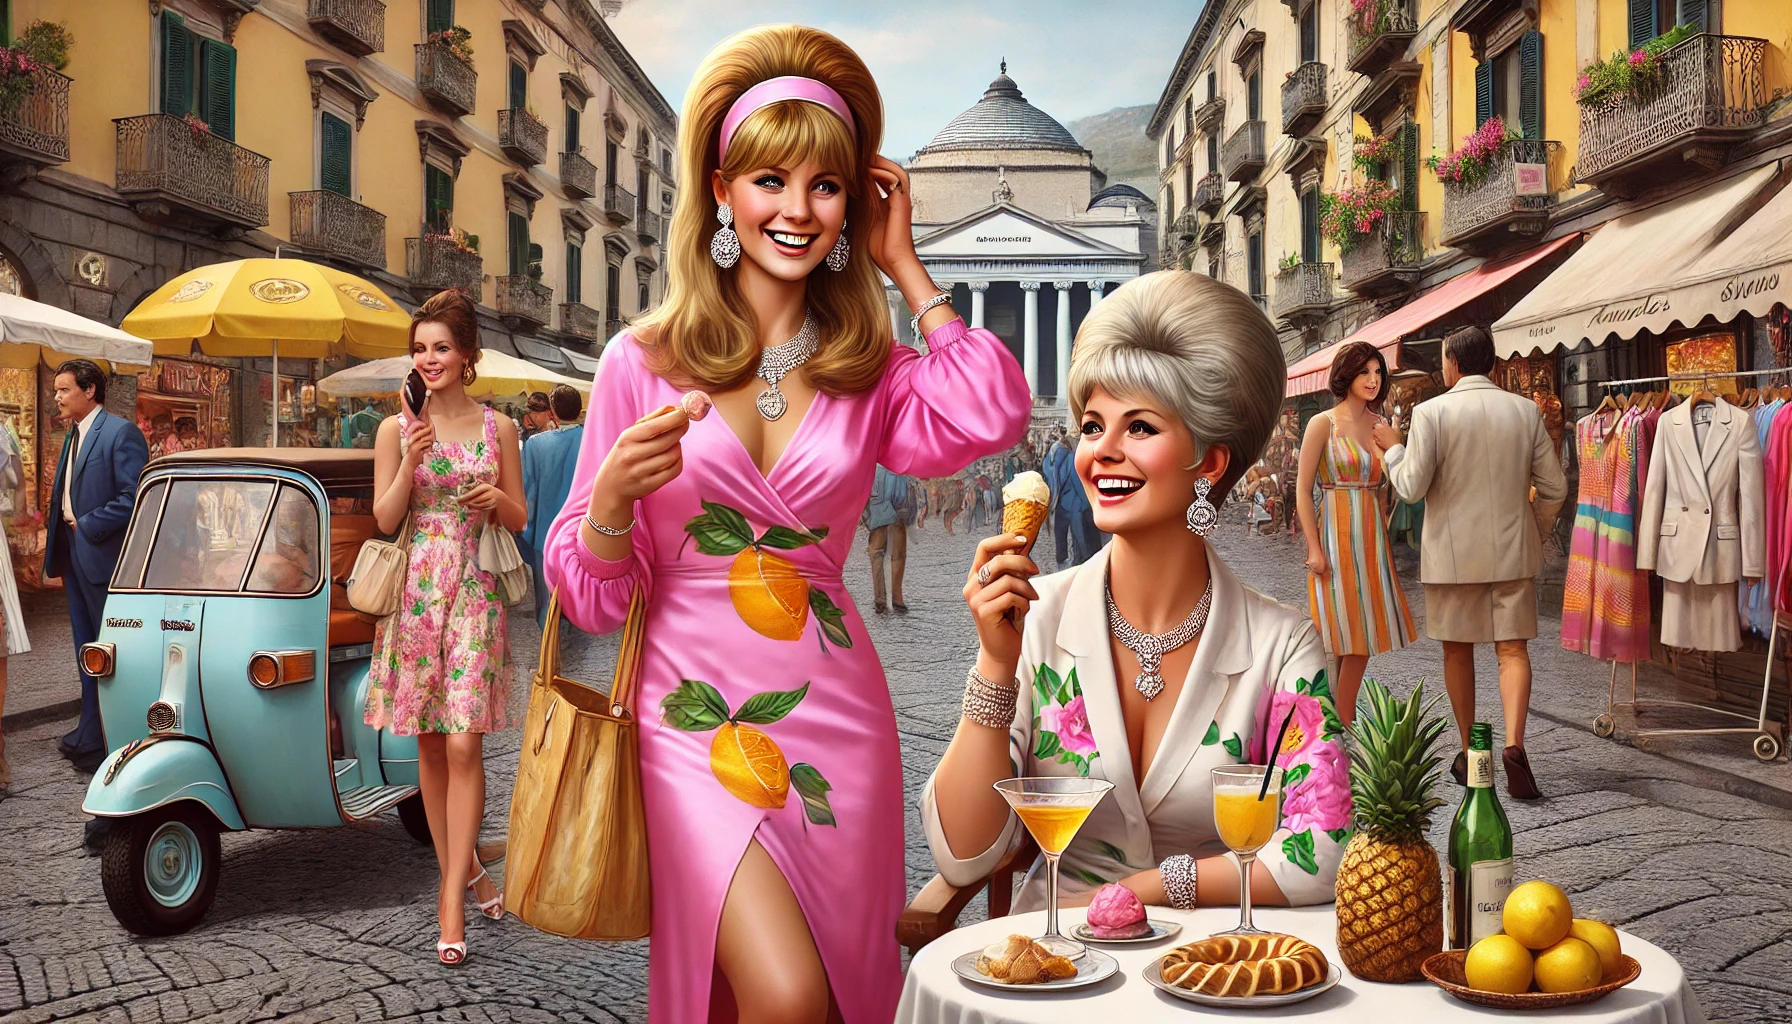  Kathy Fields and her mother Marie Read Saia enjoying gelato and drinks while shopping in Naples